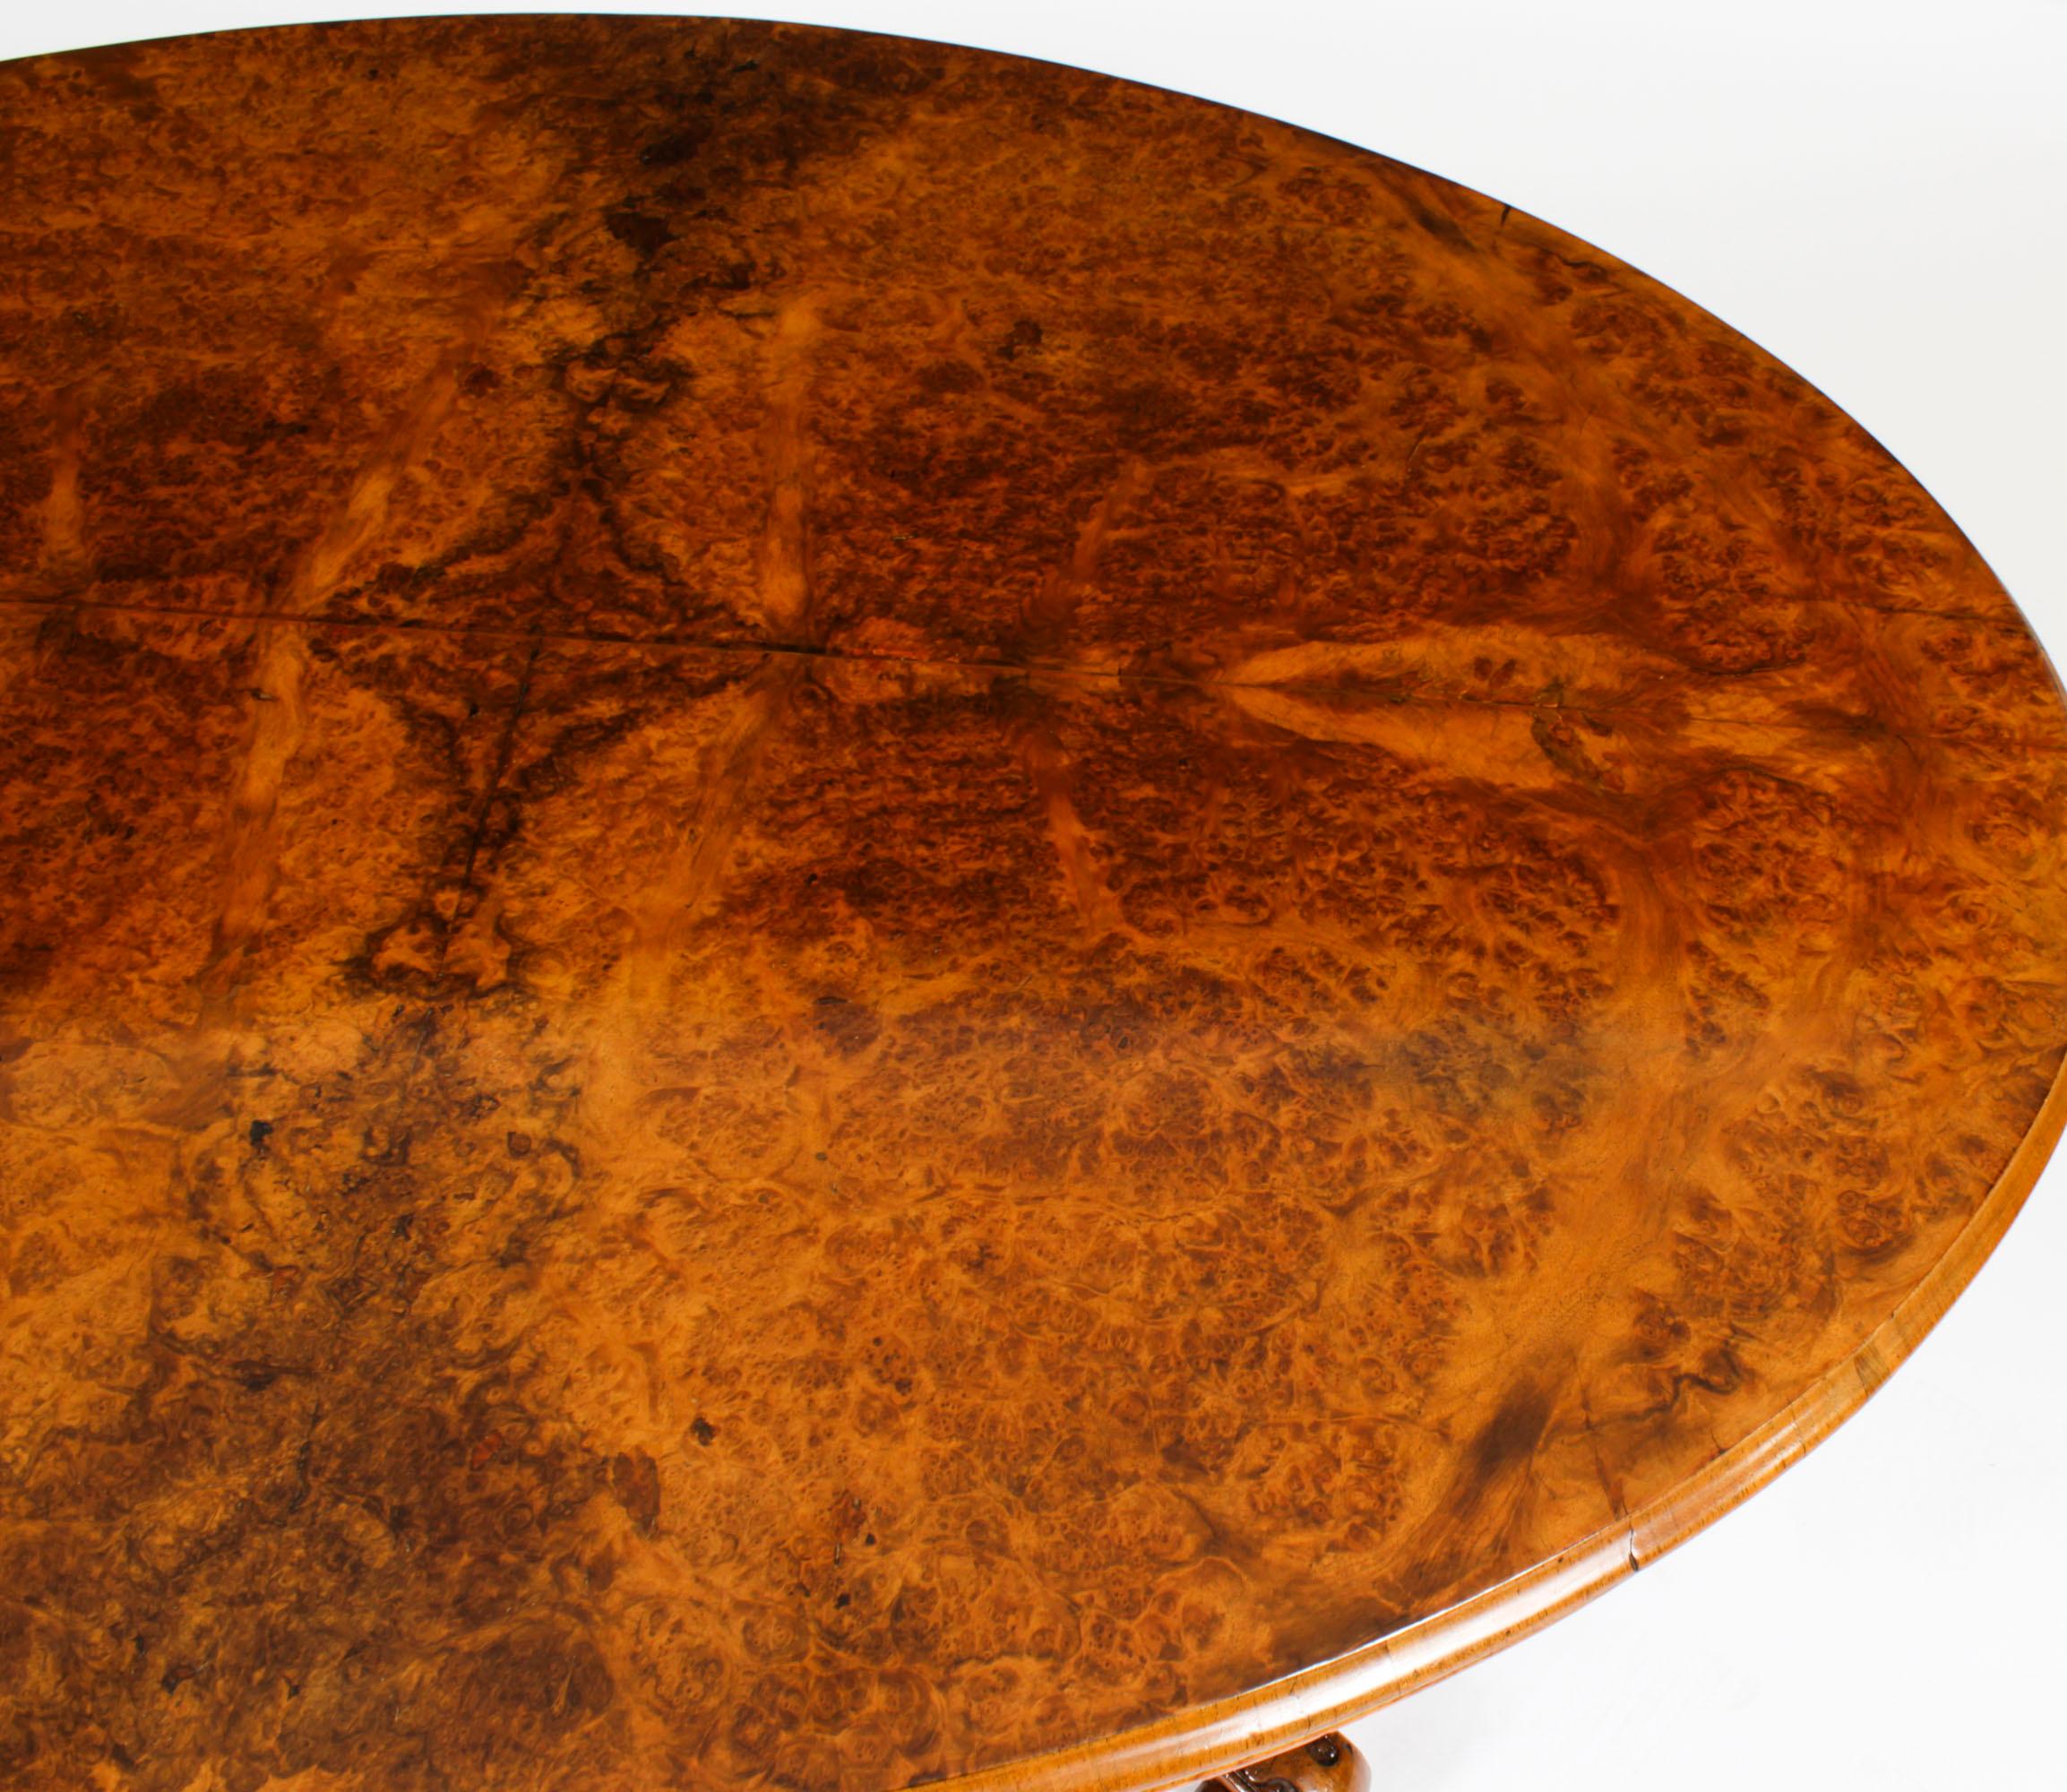 Antique Burr Walnut Oval Coffee Table 1860s 19th Century For Sale 4